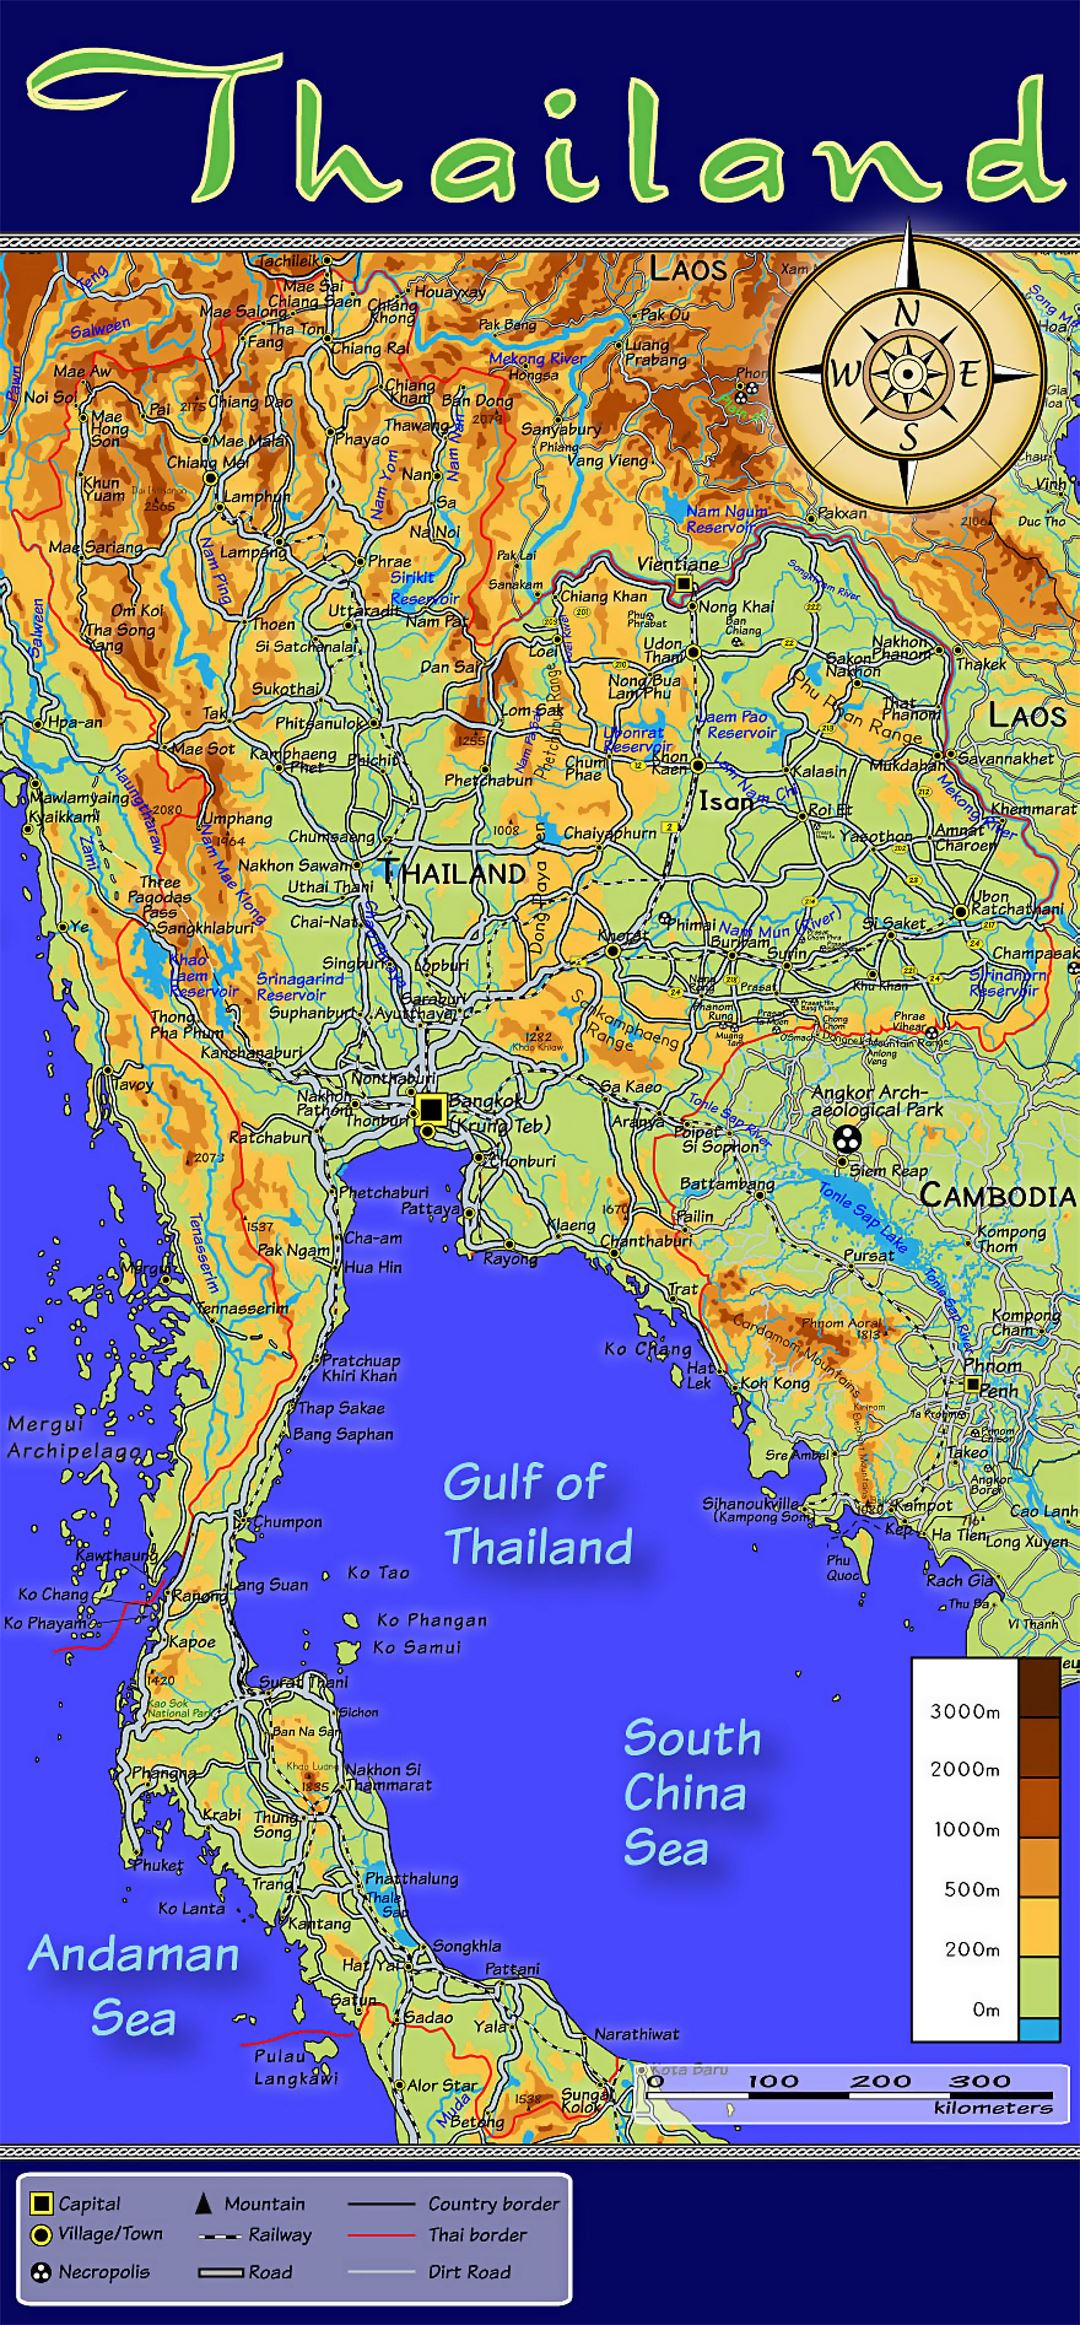 Detailed topographic map of Thailand with other marks